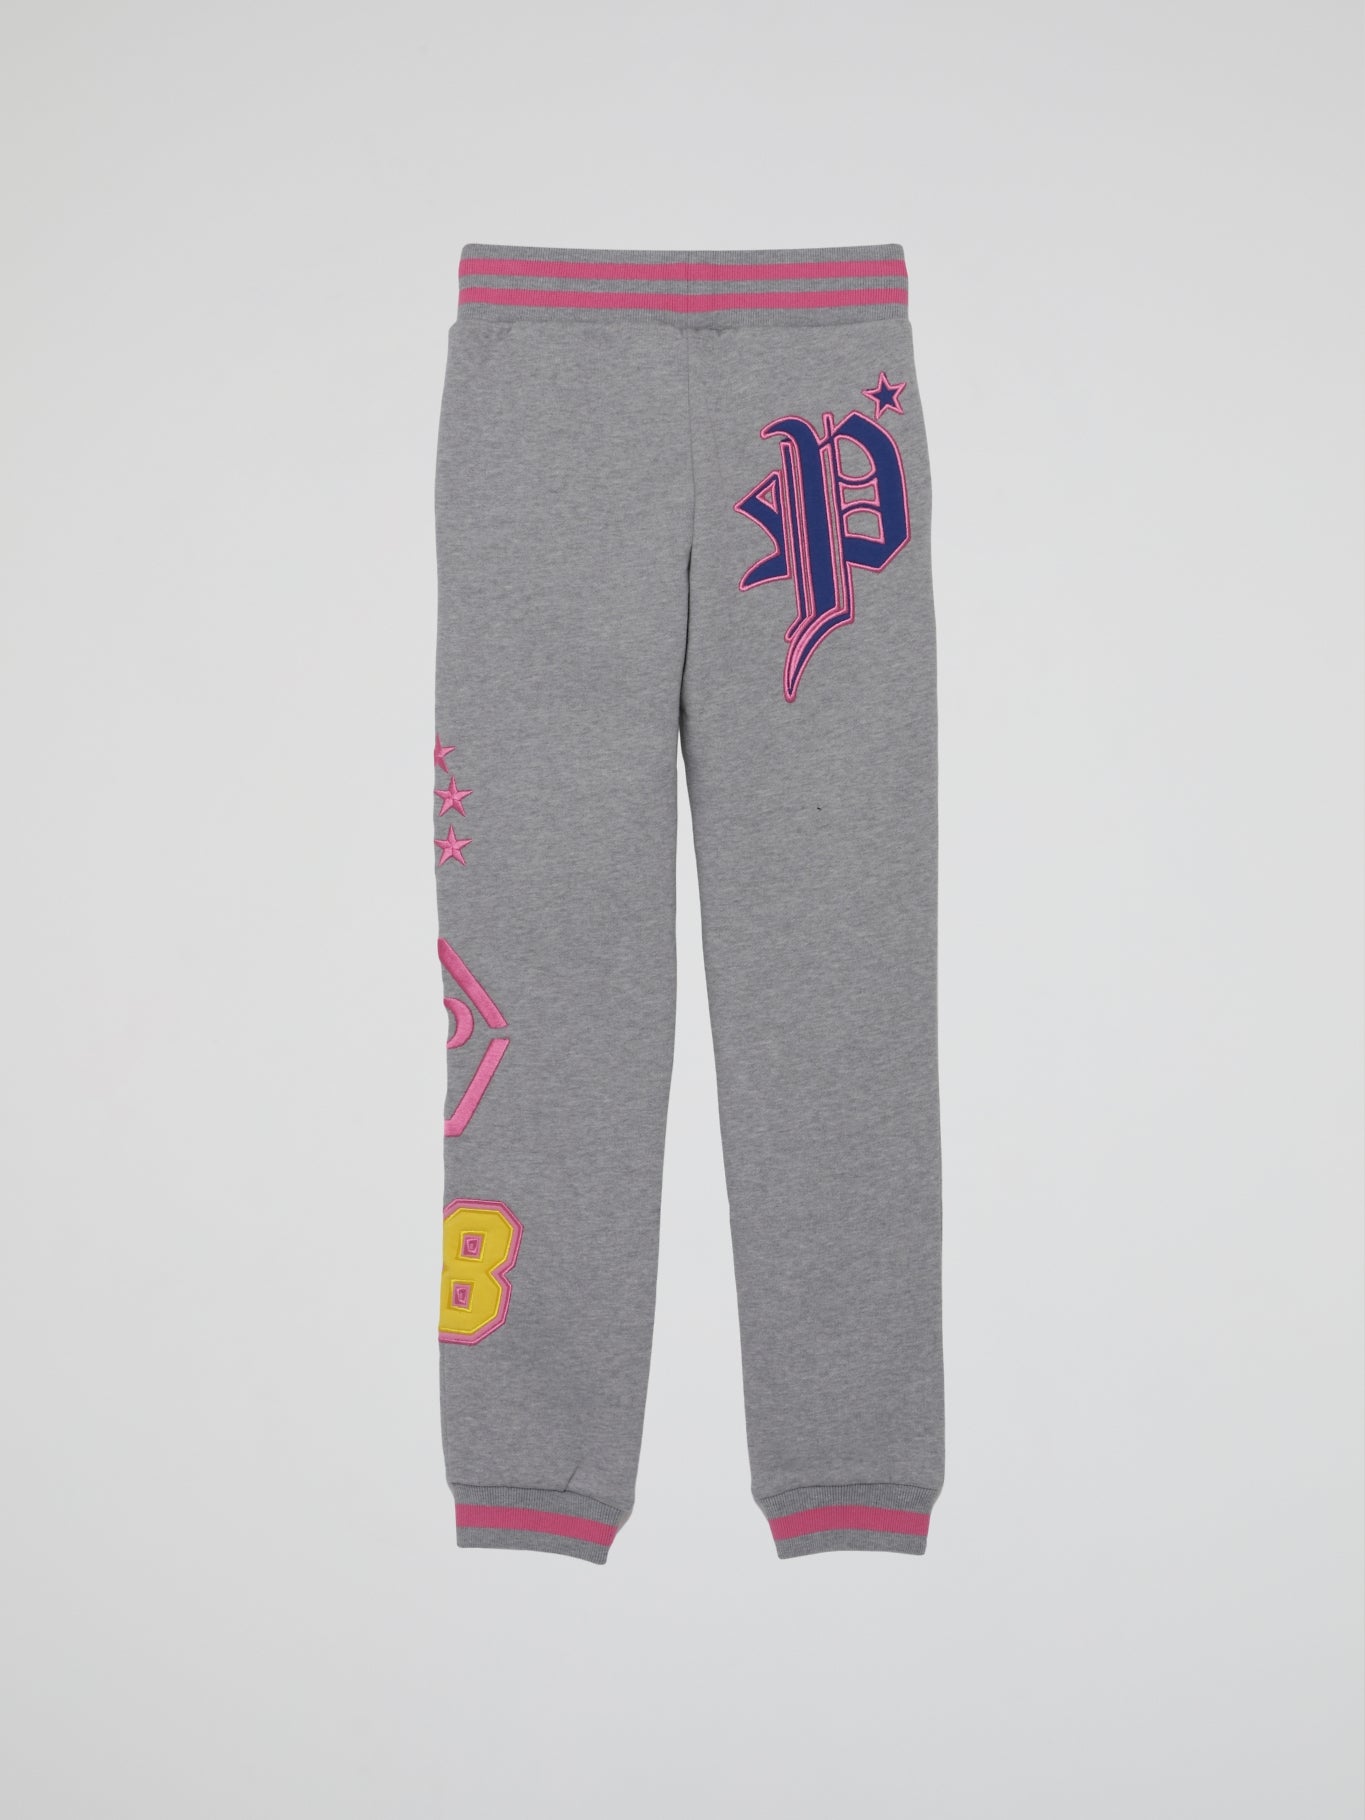 Grey With Pink Logo Design Jogging Trousers (Kids)